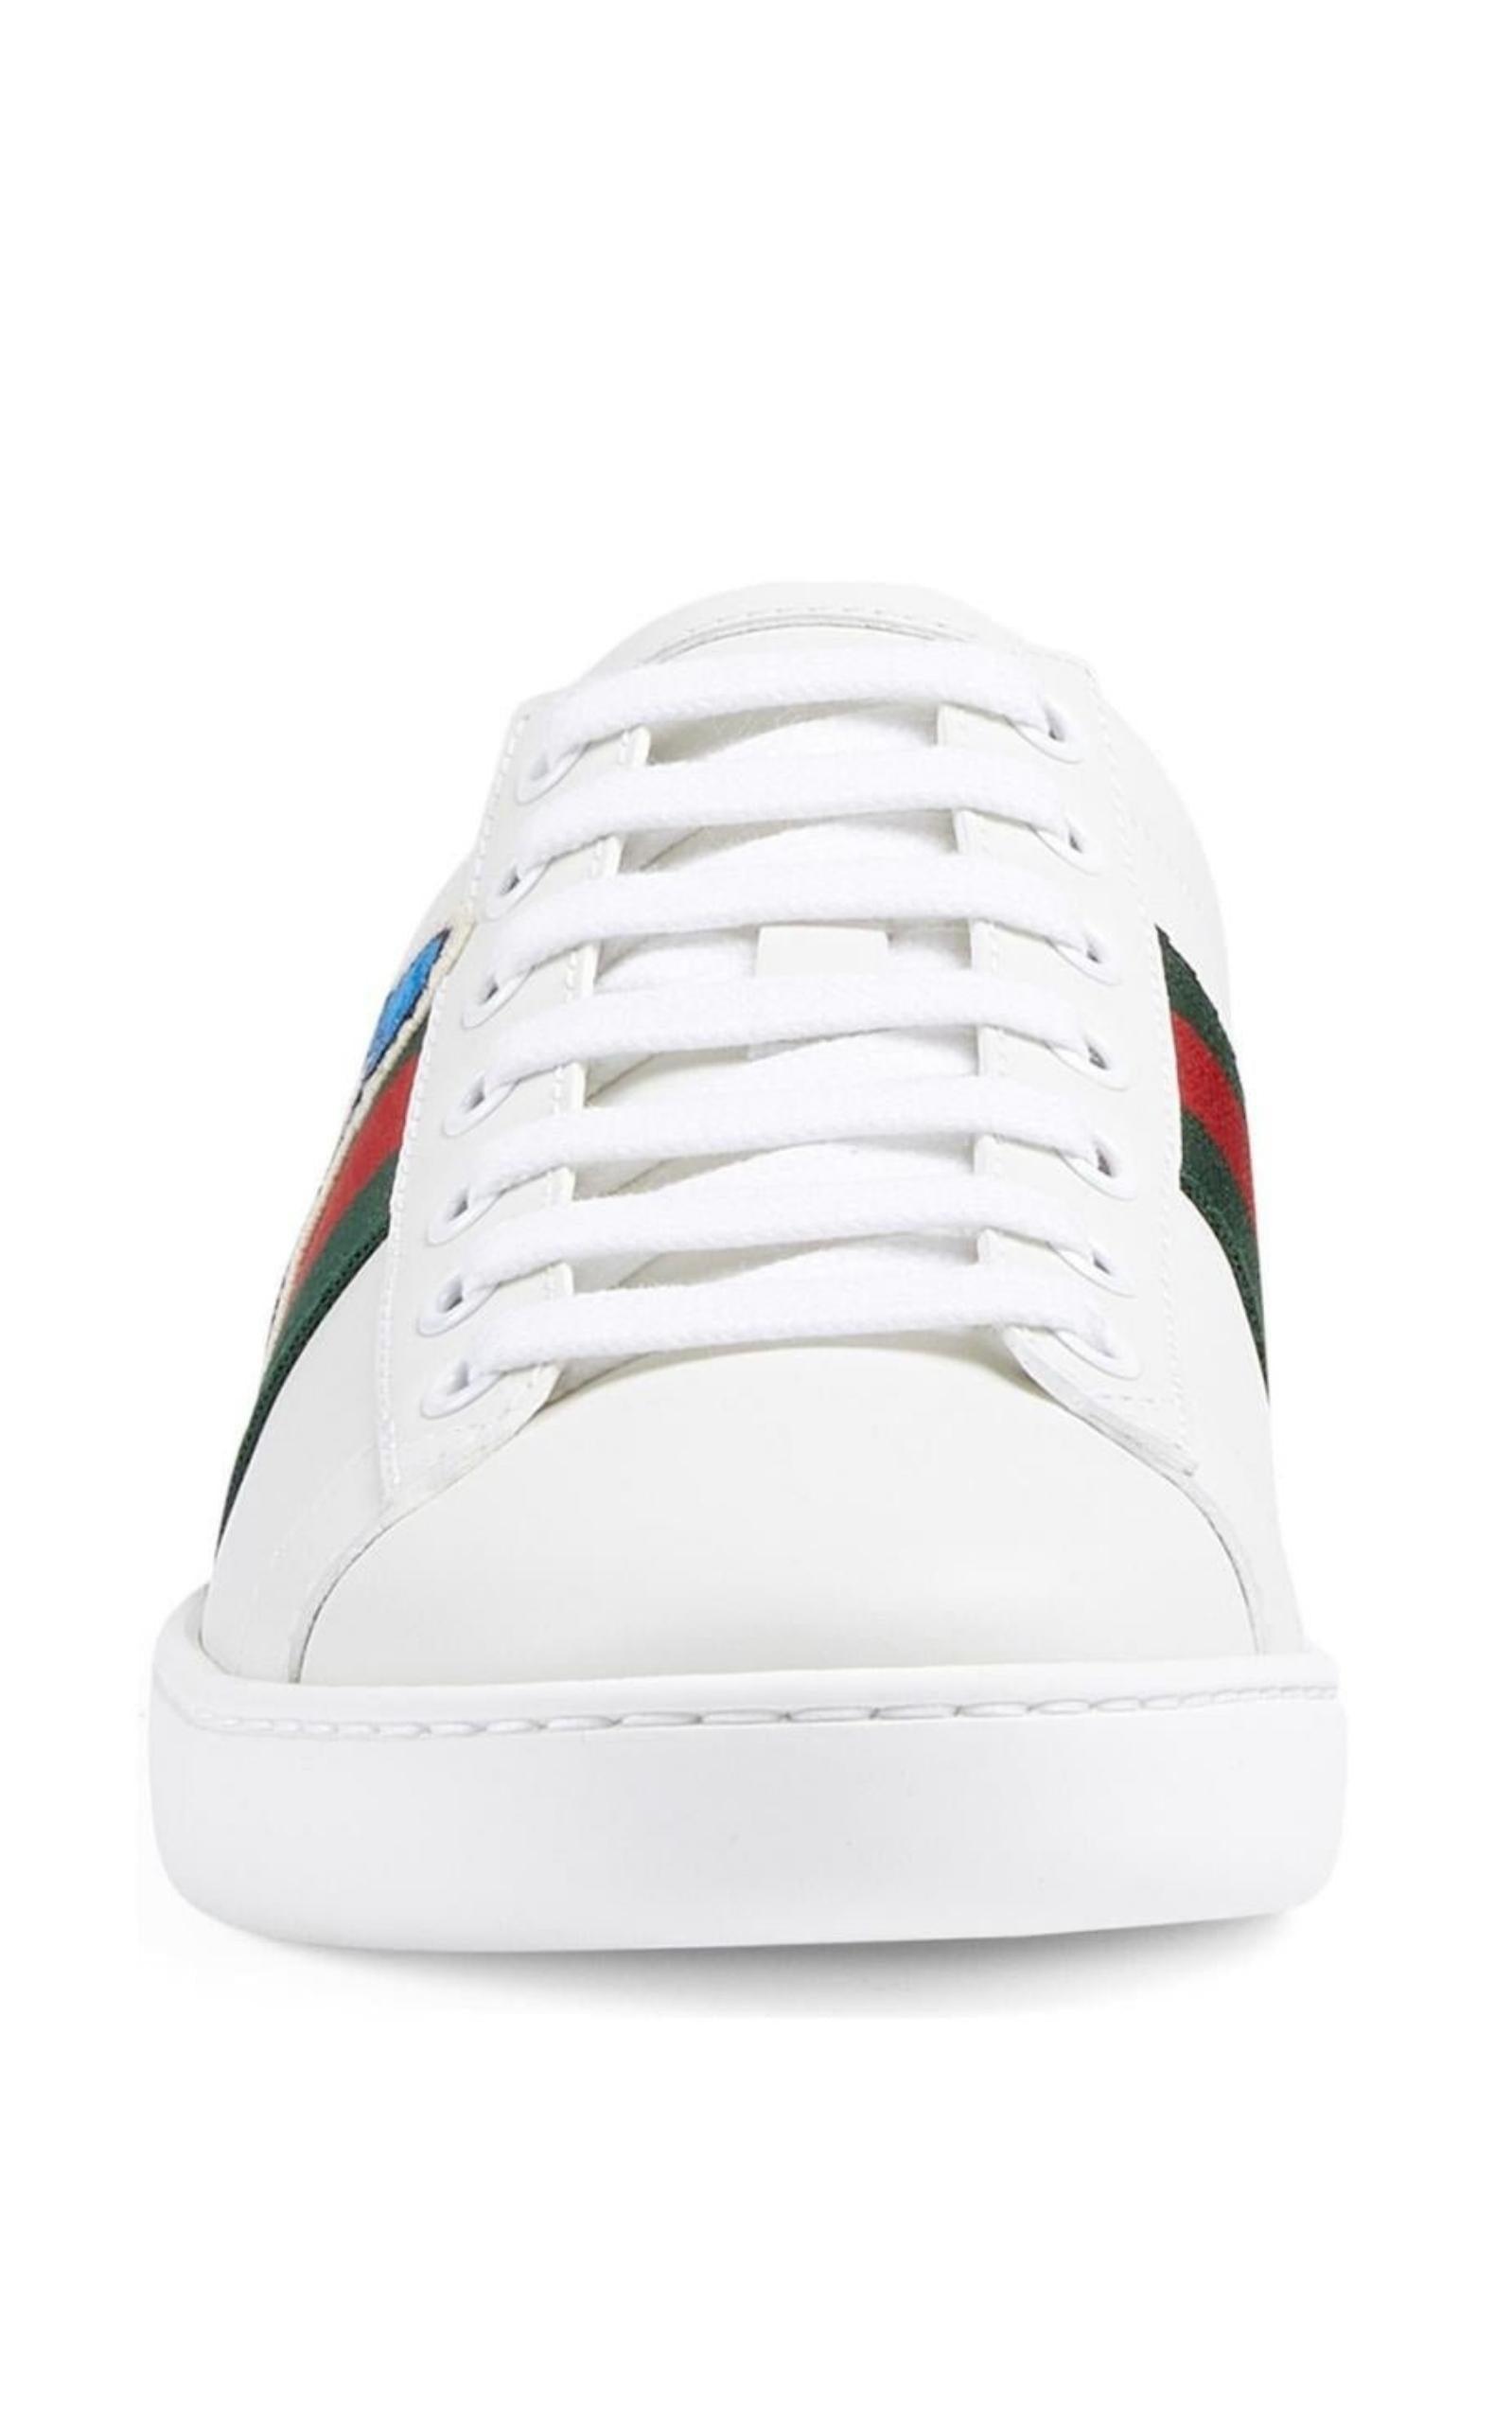 Men's Gucci Ace sneaker with Web in white leather | GUCCI® US